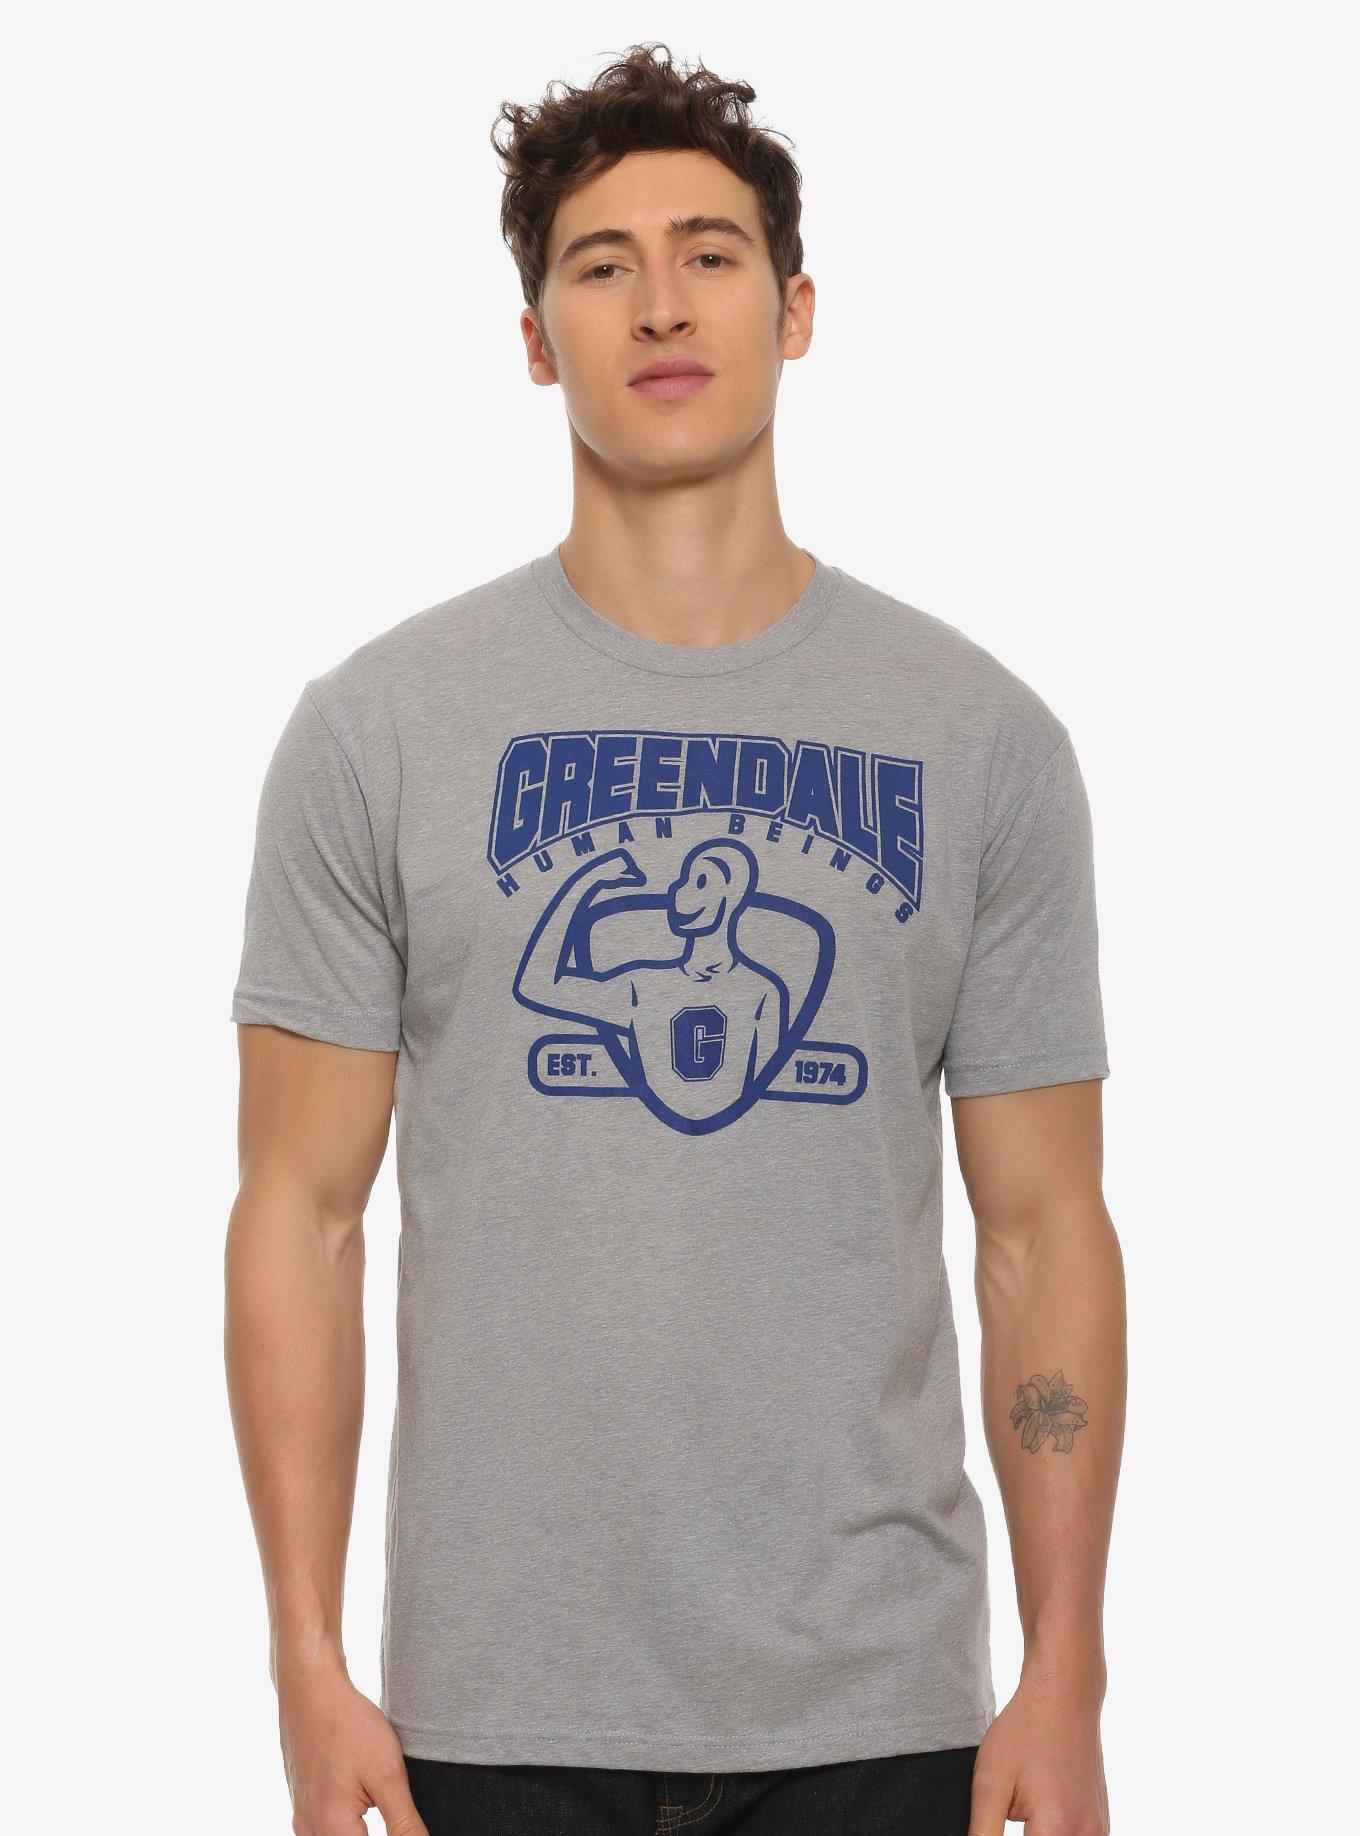 Community Greendale Human Beings T-Shirt - BoxLunch Exclusive, GREY, hi-res